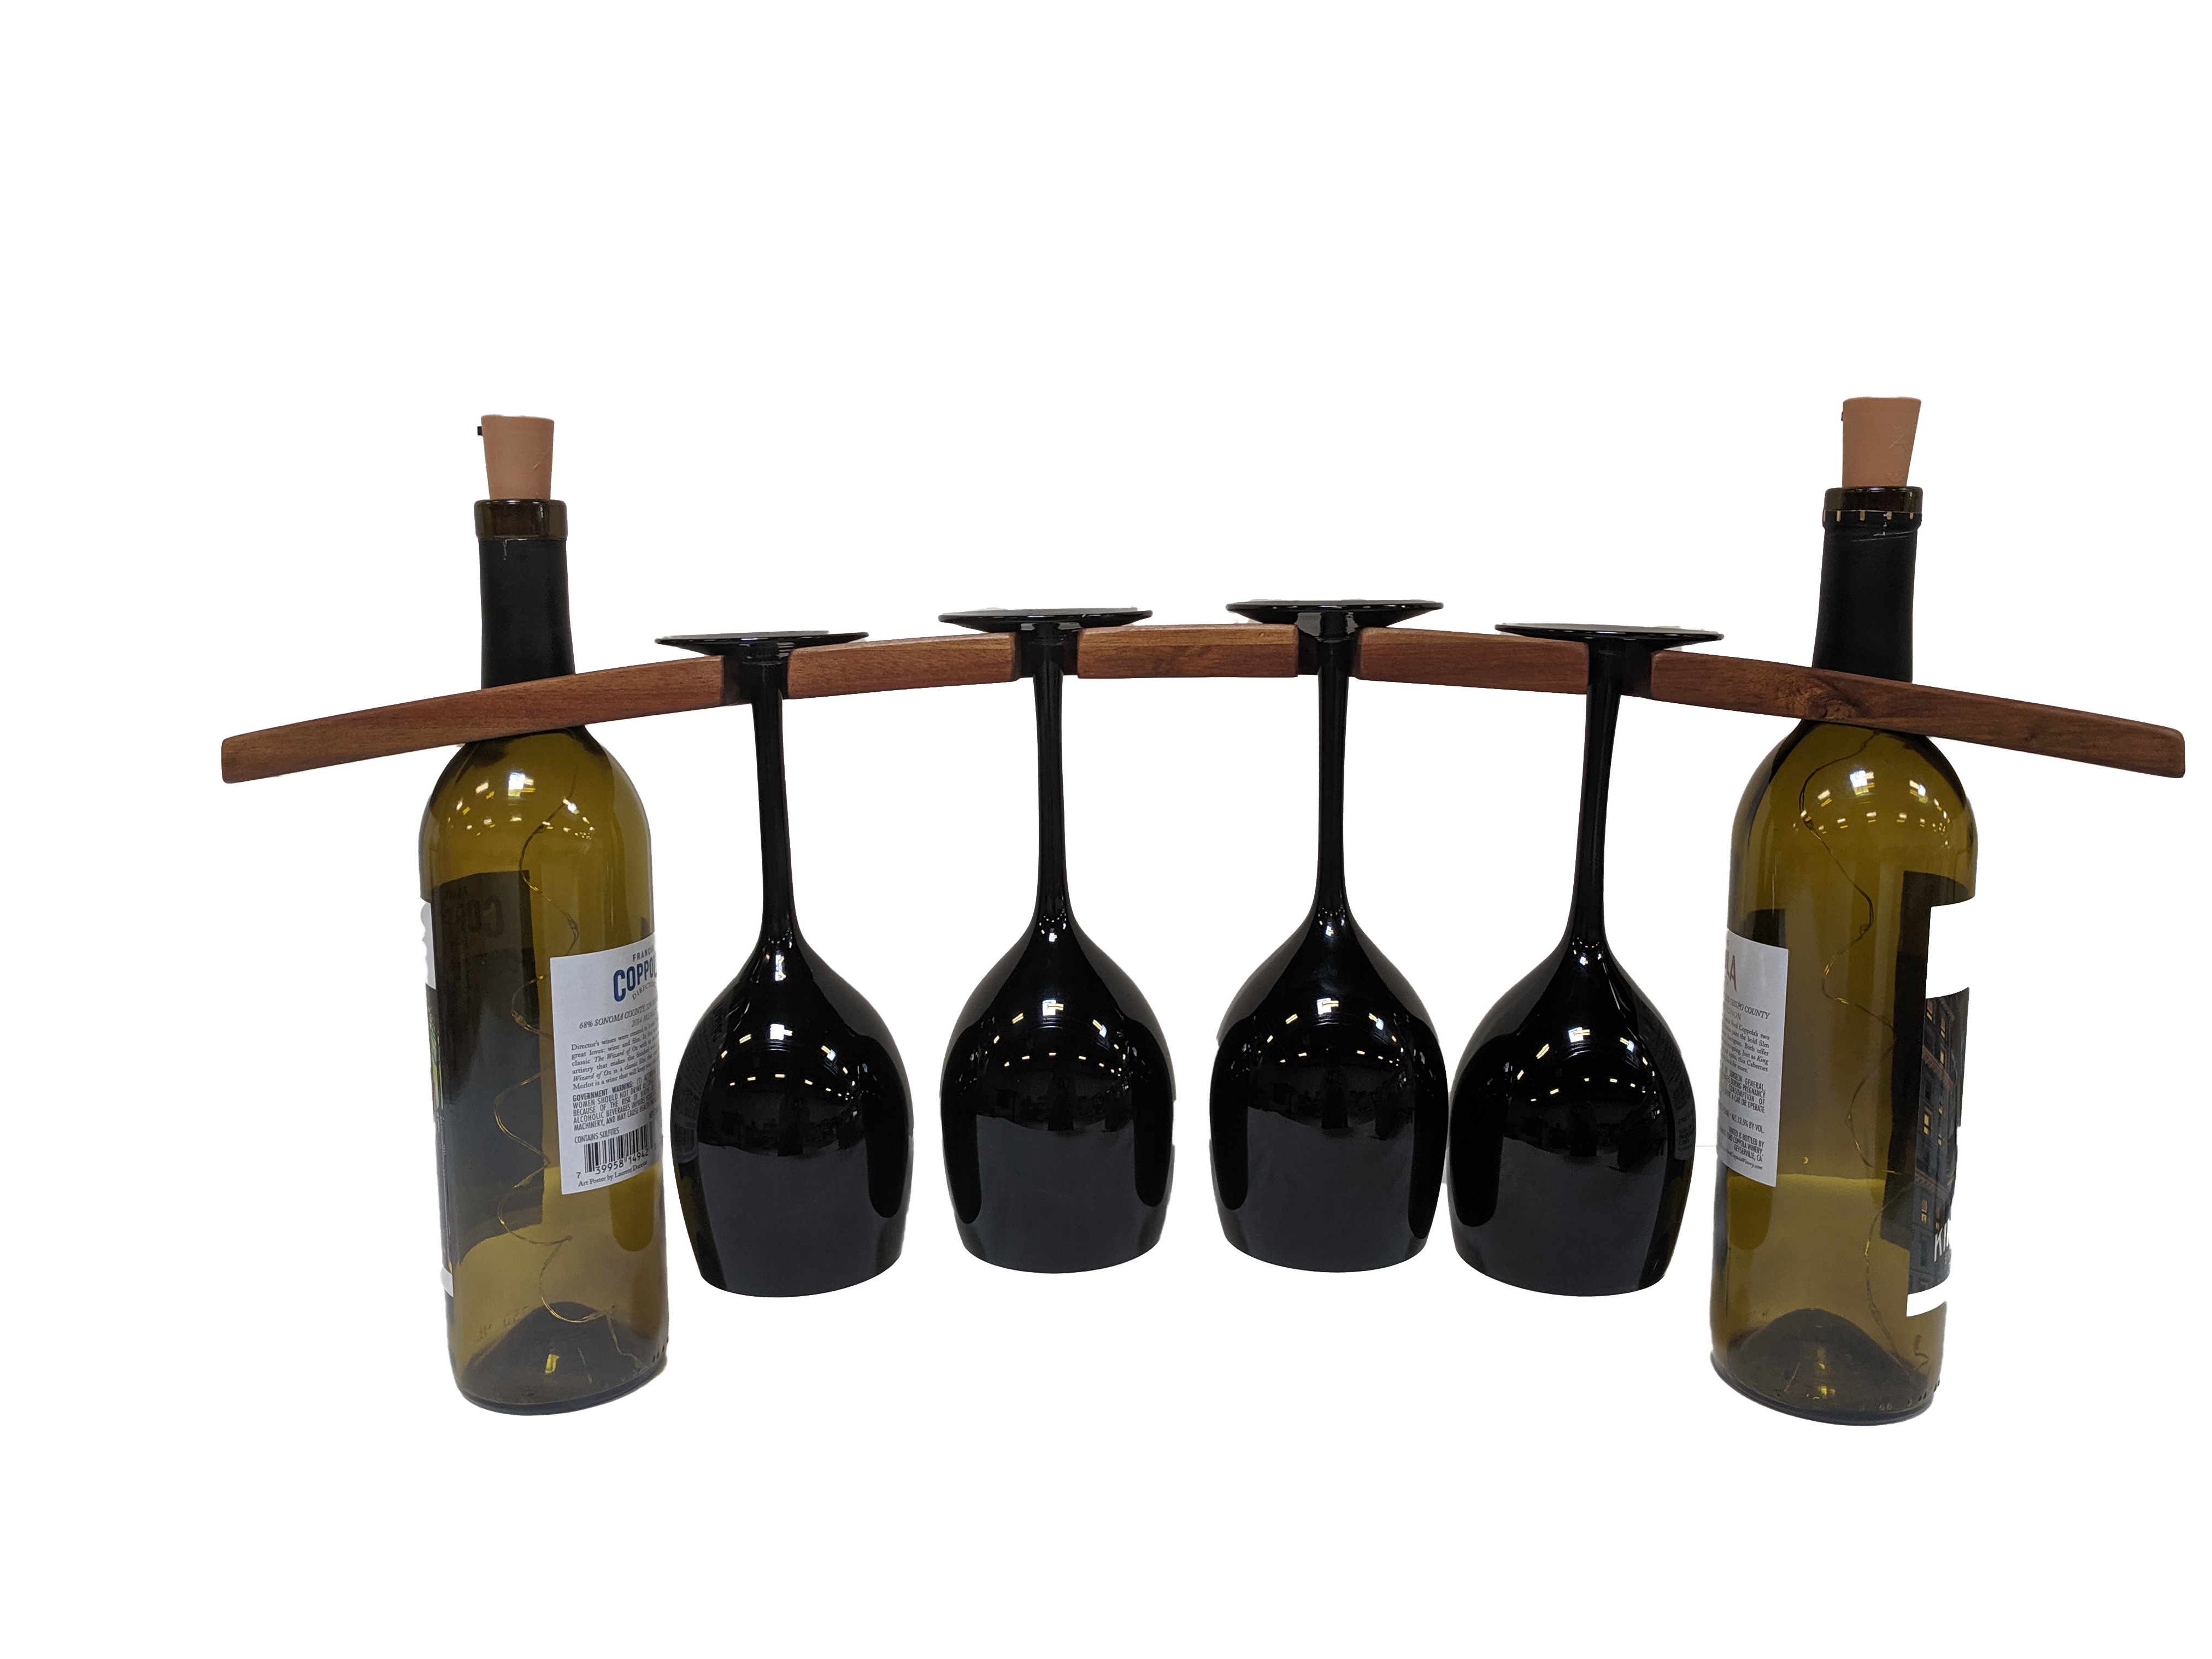 https://www.lotechsales.com/wp-content/uploads/2019/05/Wine-glass-holder-with-black-glasses-3-e1559224742341.png